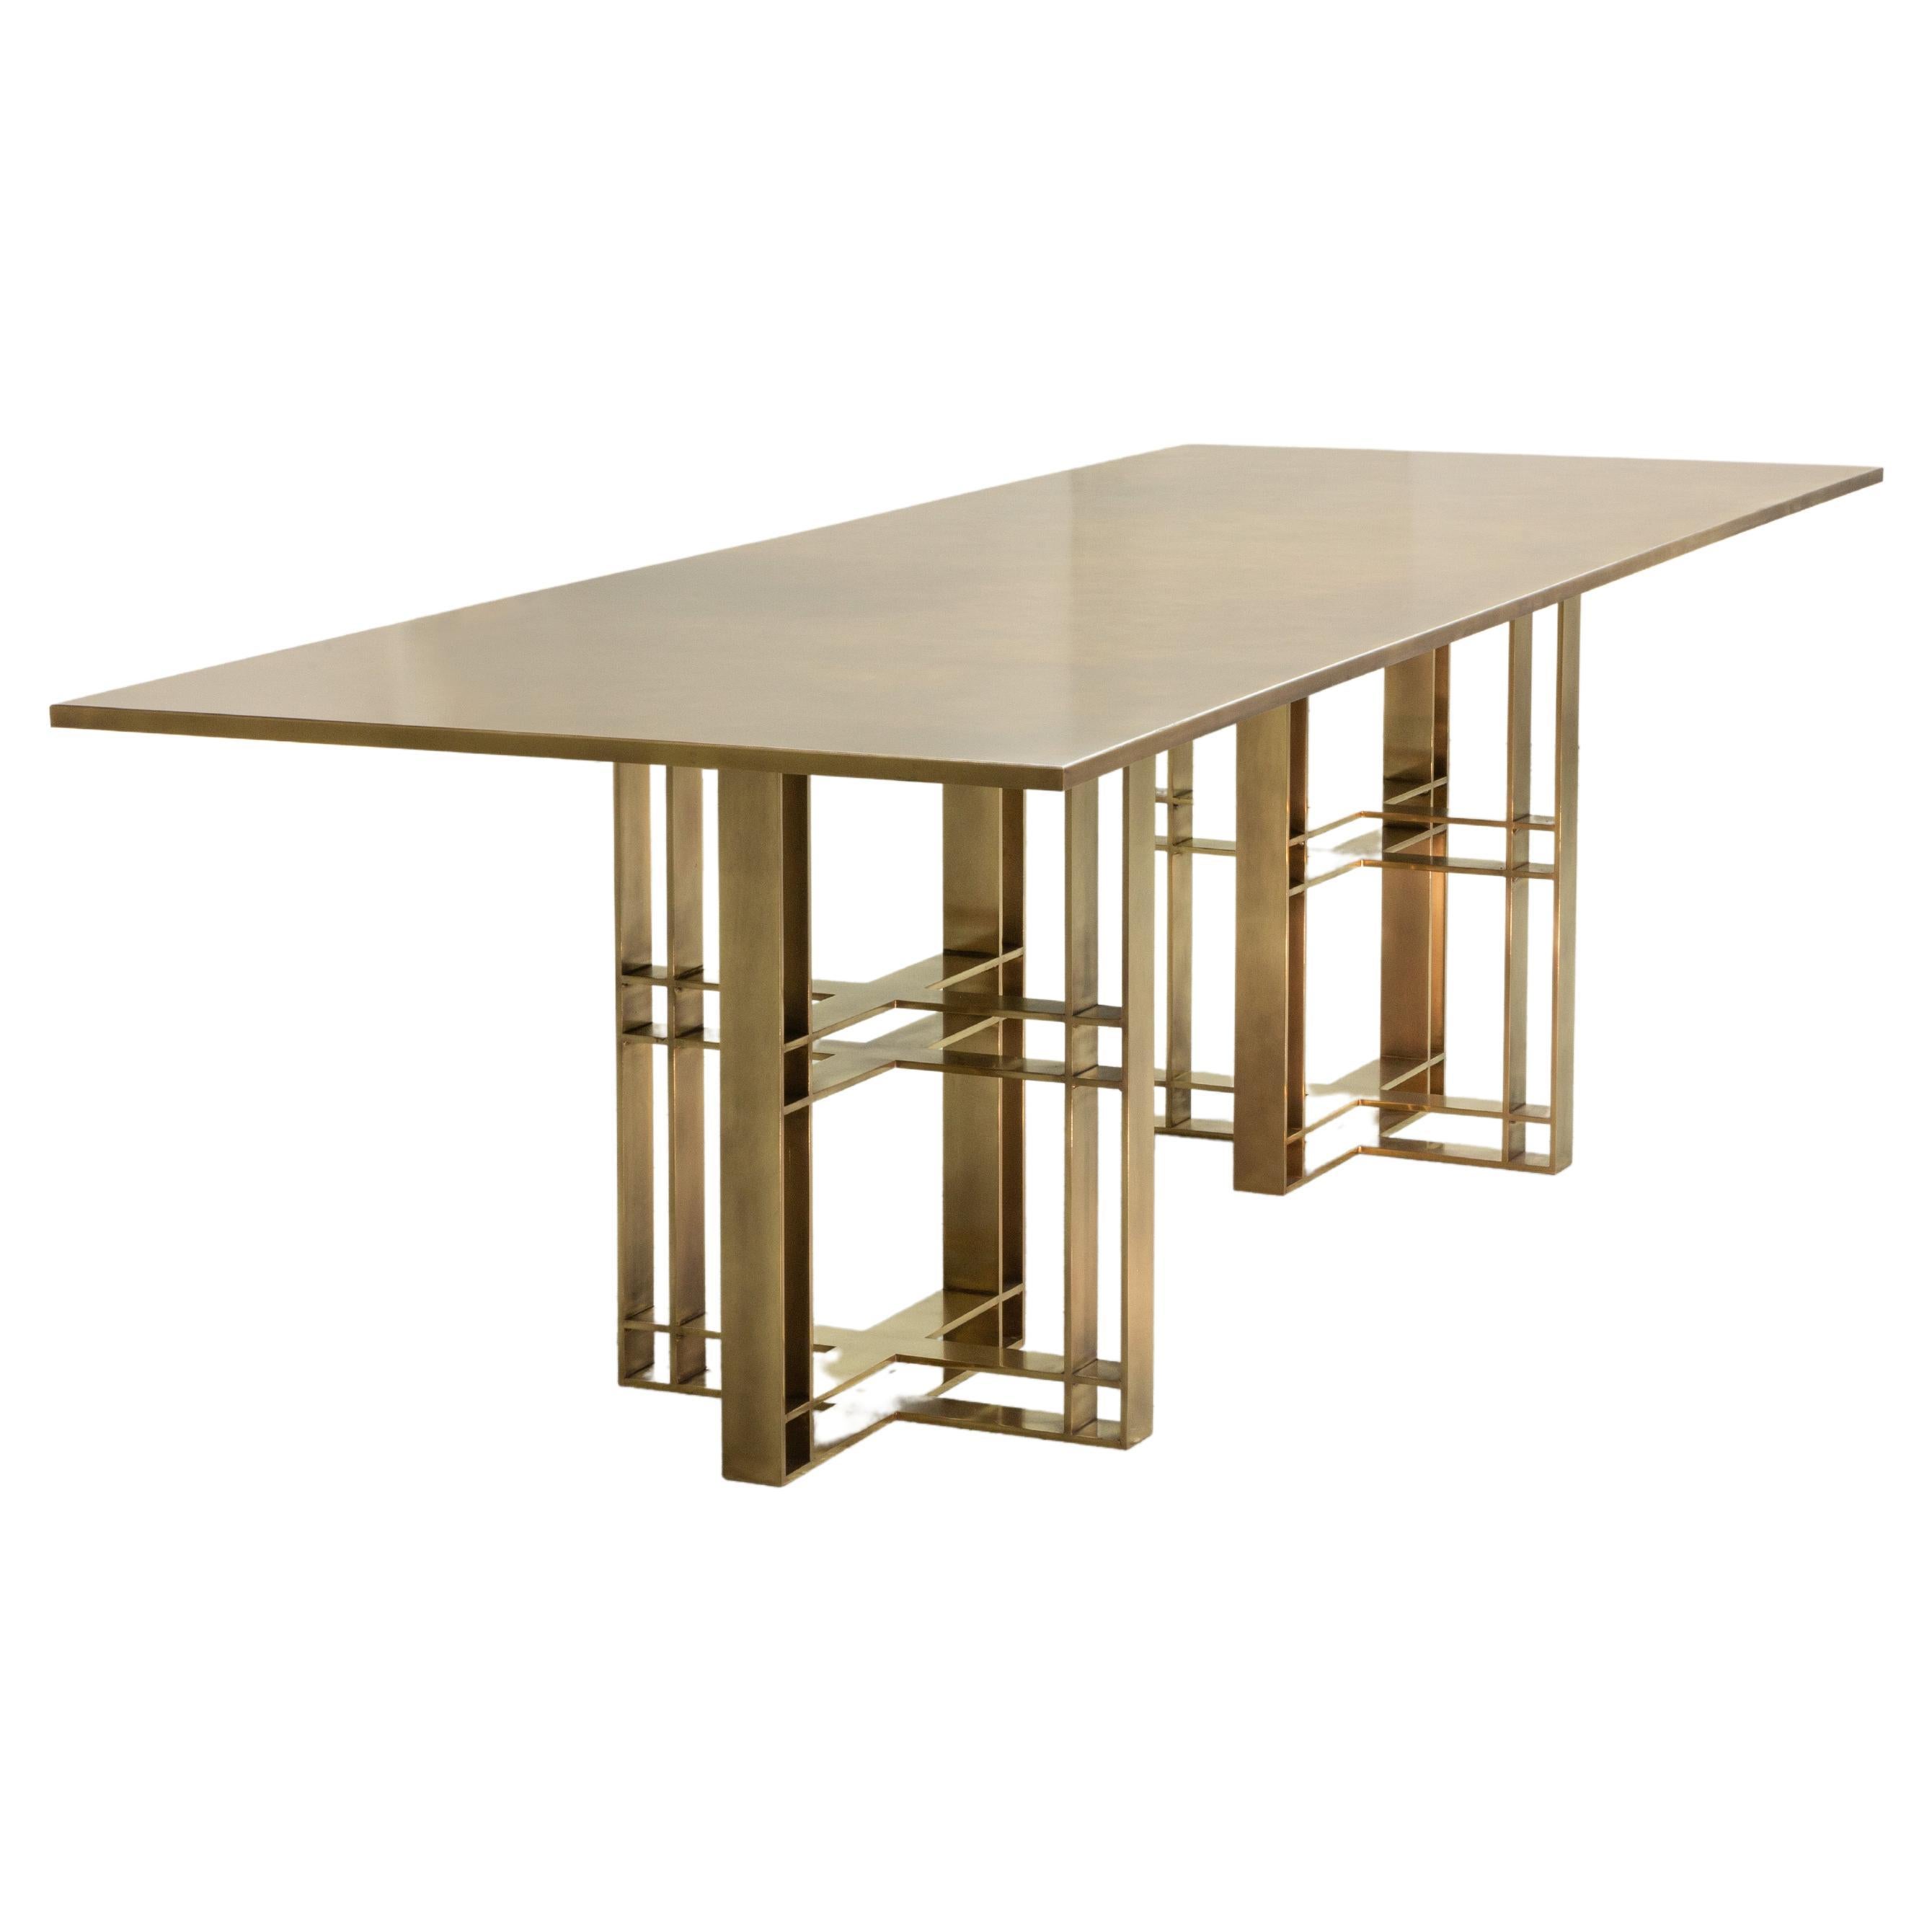 Richy Almond Dining Room Tables